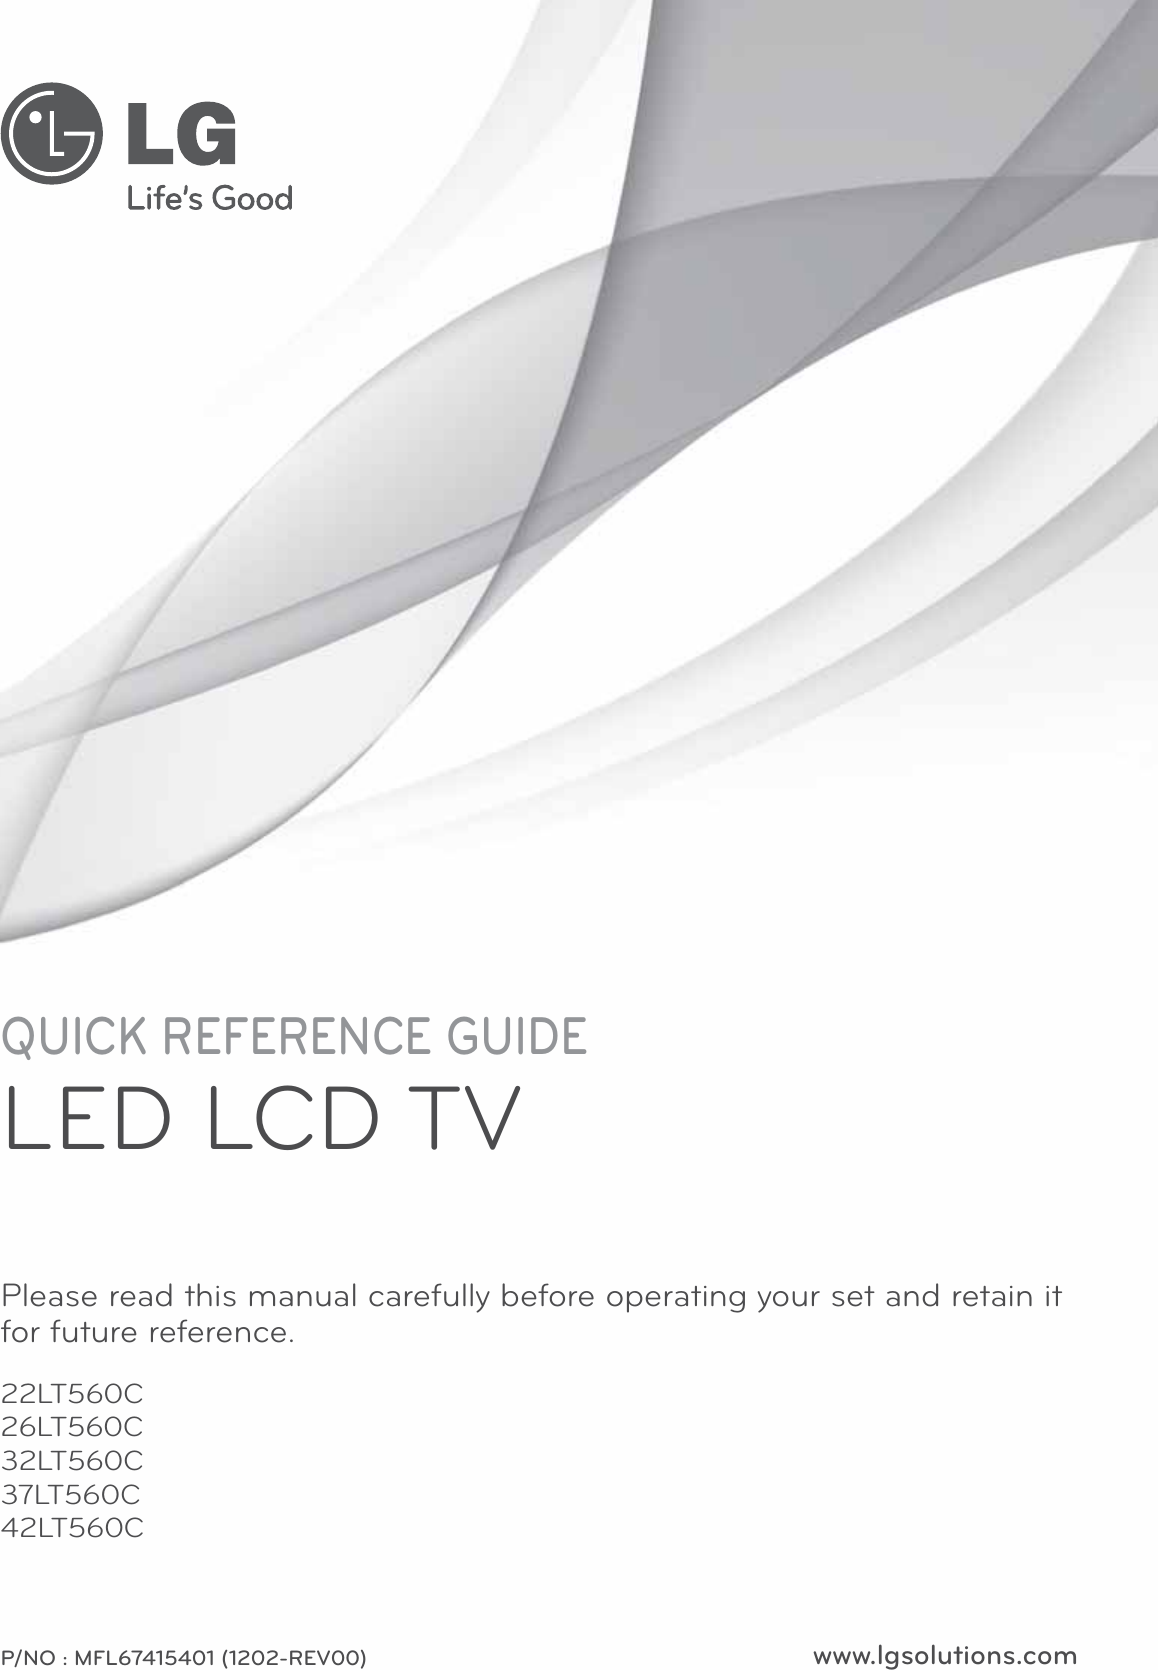 www.lgsolutions.comQUICK REFERENCE GUIDELED LCD TVPlease read this manual carefully before operating your set and retain it for future reference.P/NO : MFL67415401 (1202-REV00)22LT560C26LT560C32LT560C37LT560C42LT560C